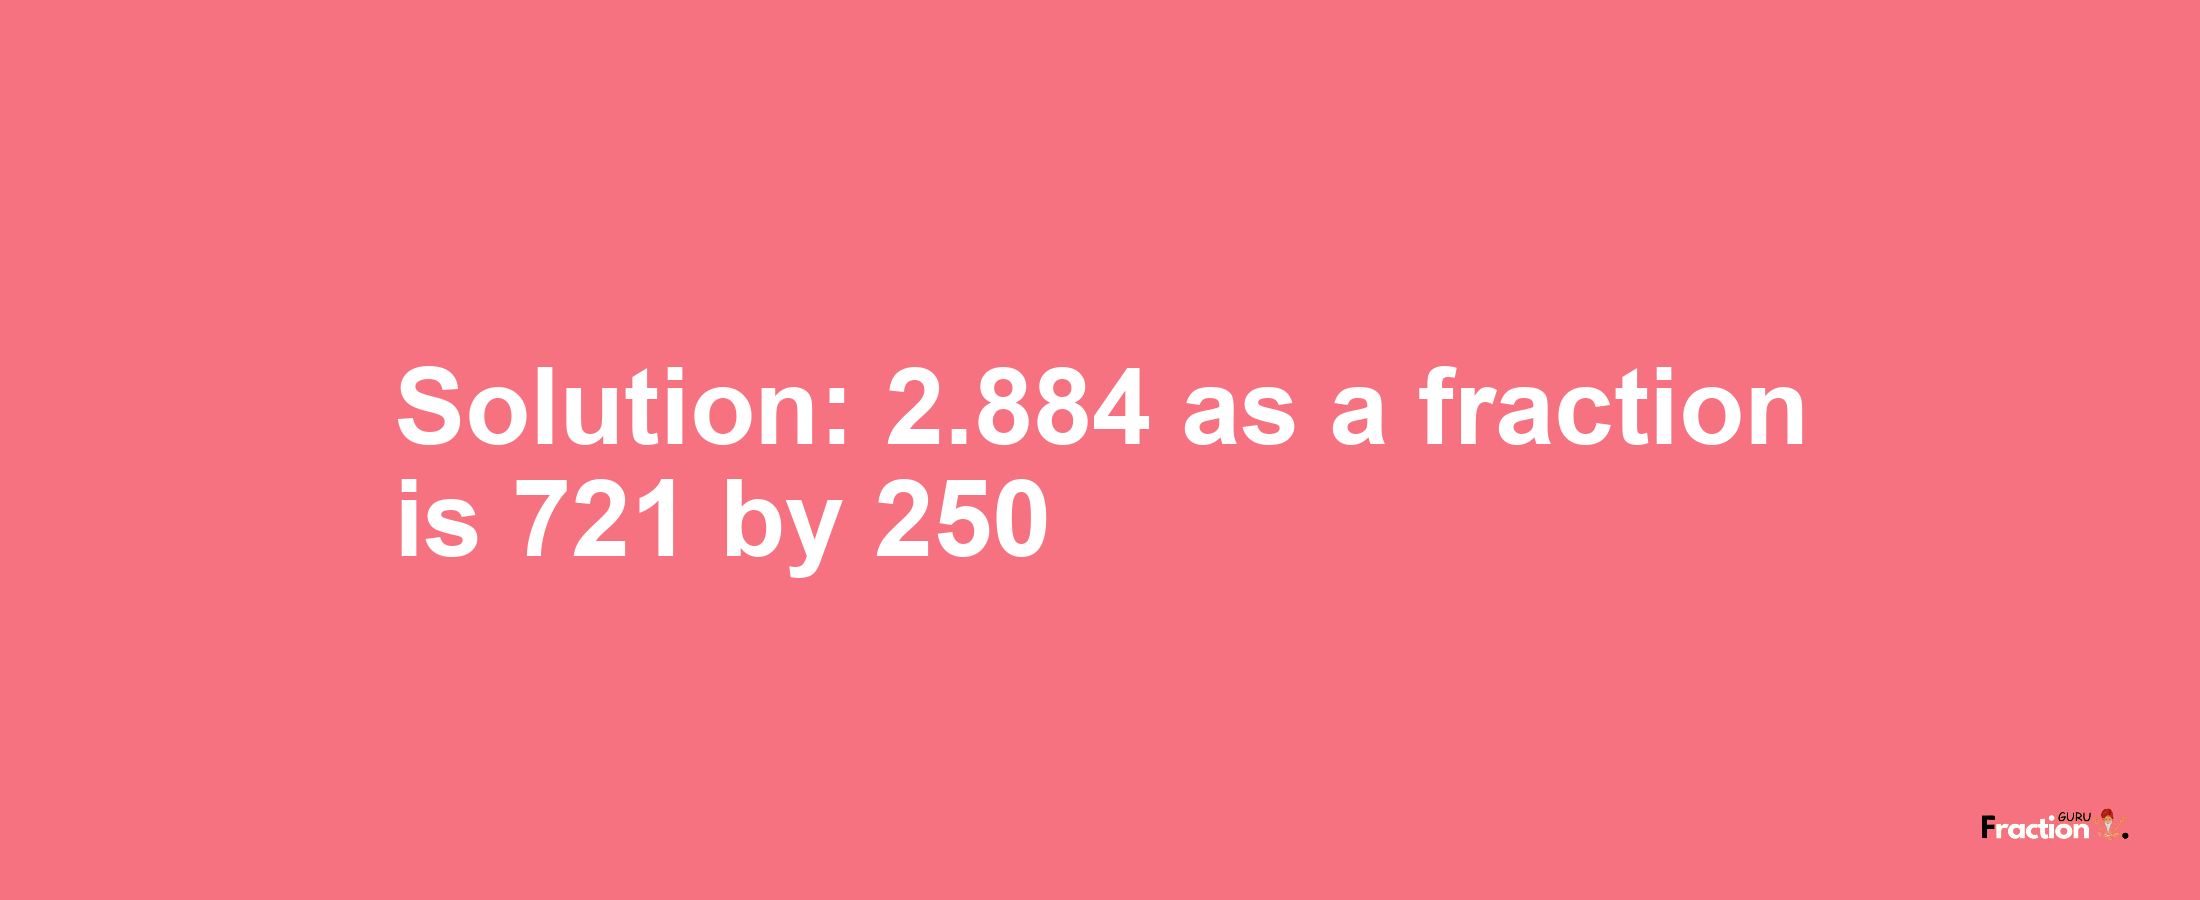 Solution:2.884 as a fraction is 721/250